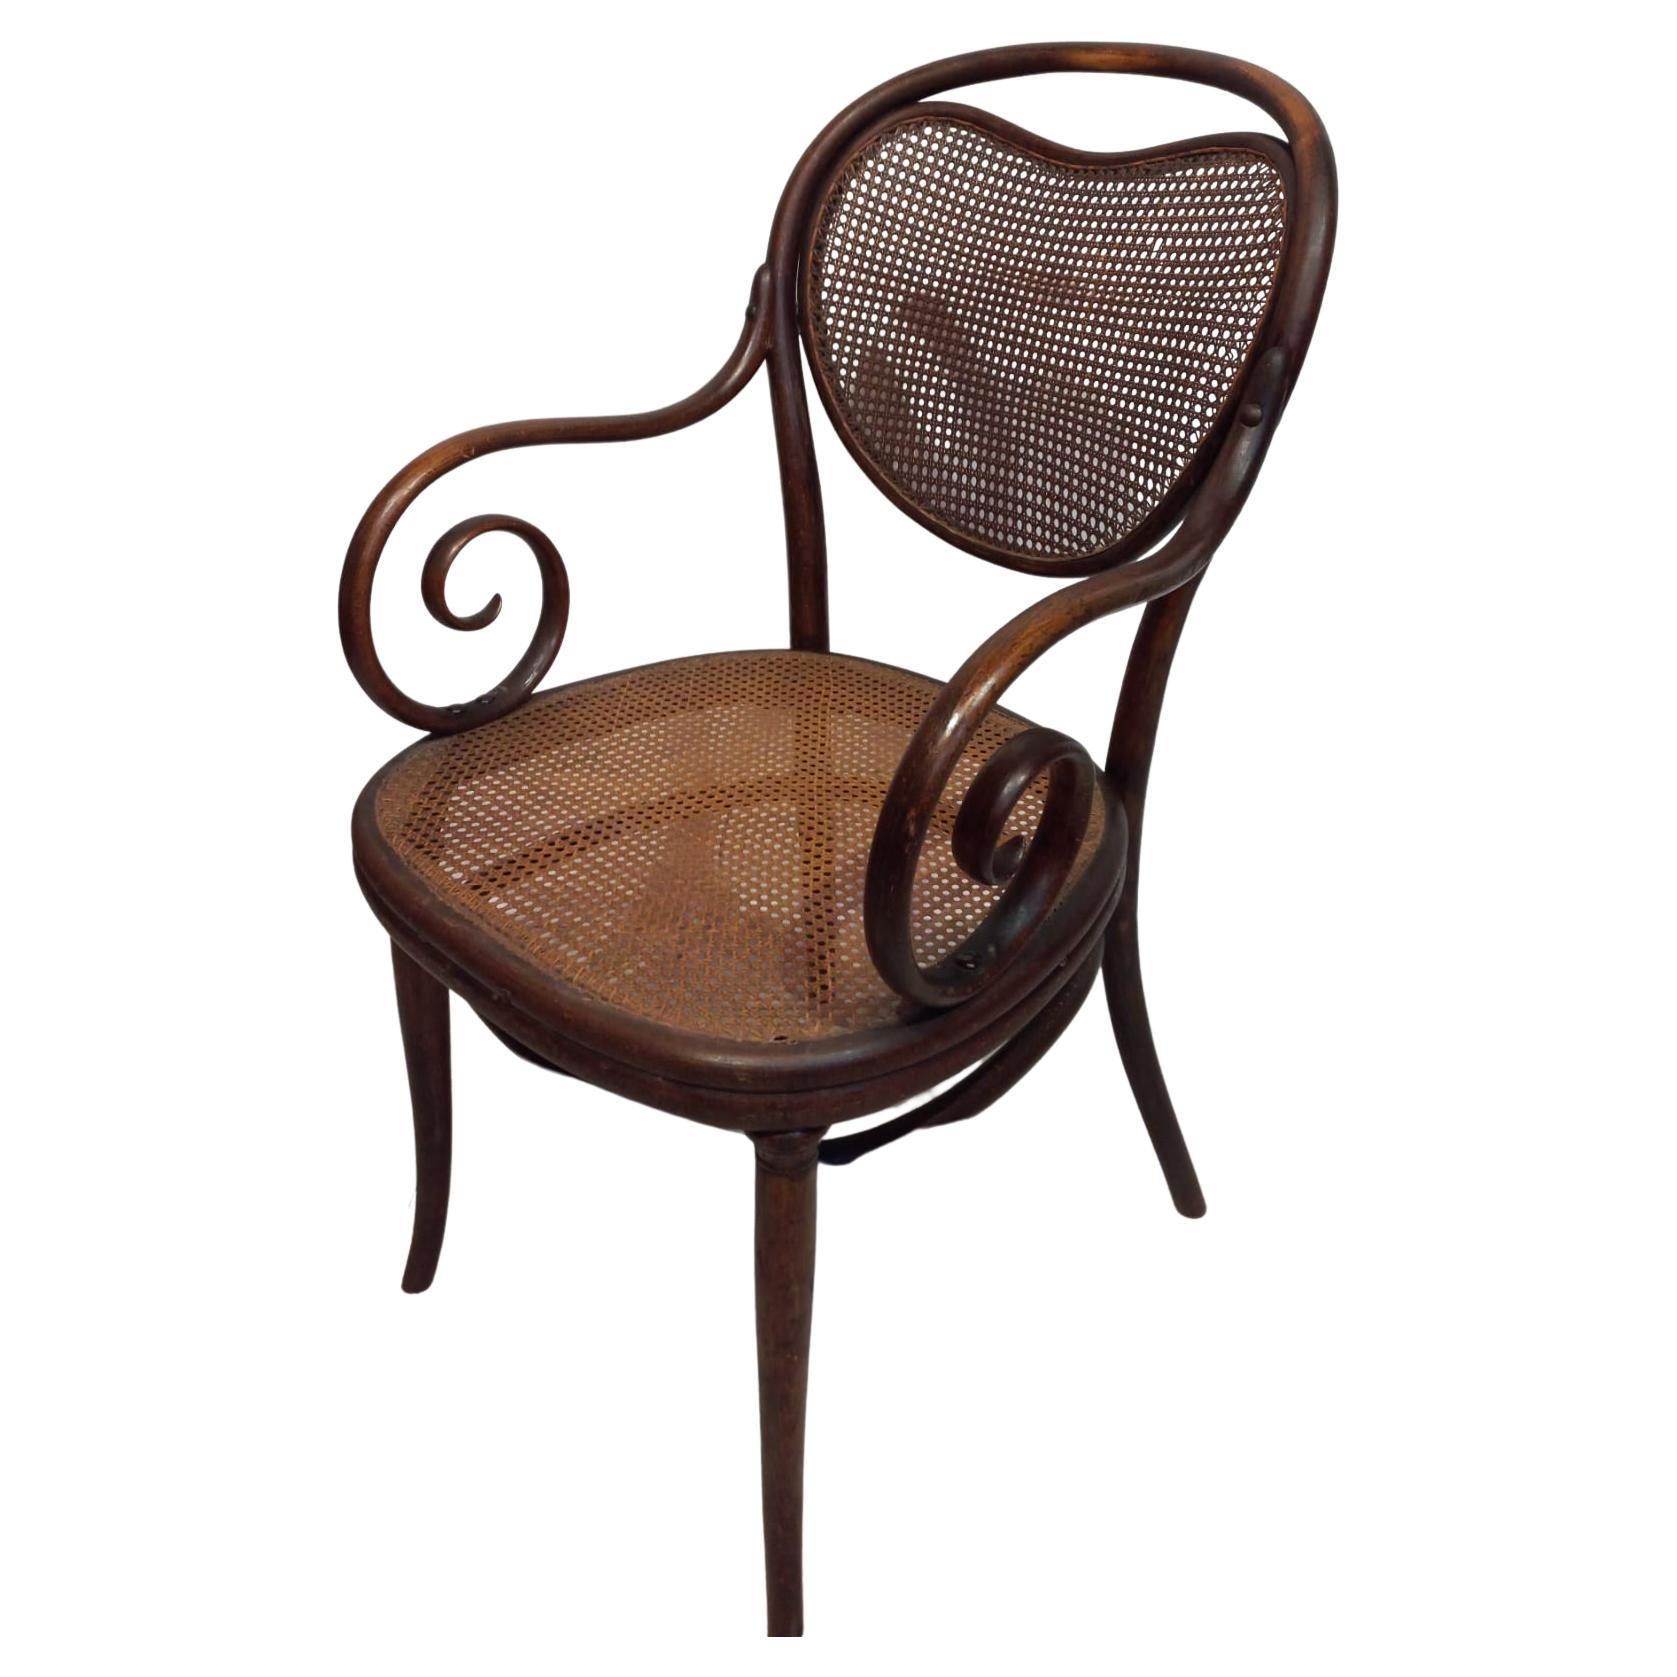 Rattan Thonet chair from the 1870s with curved armrests For Sale